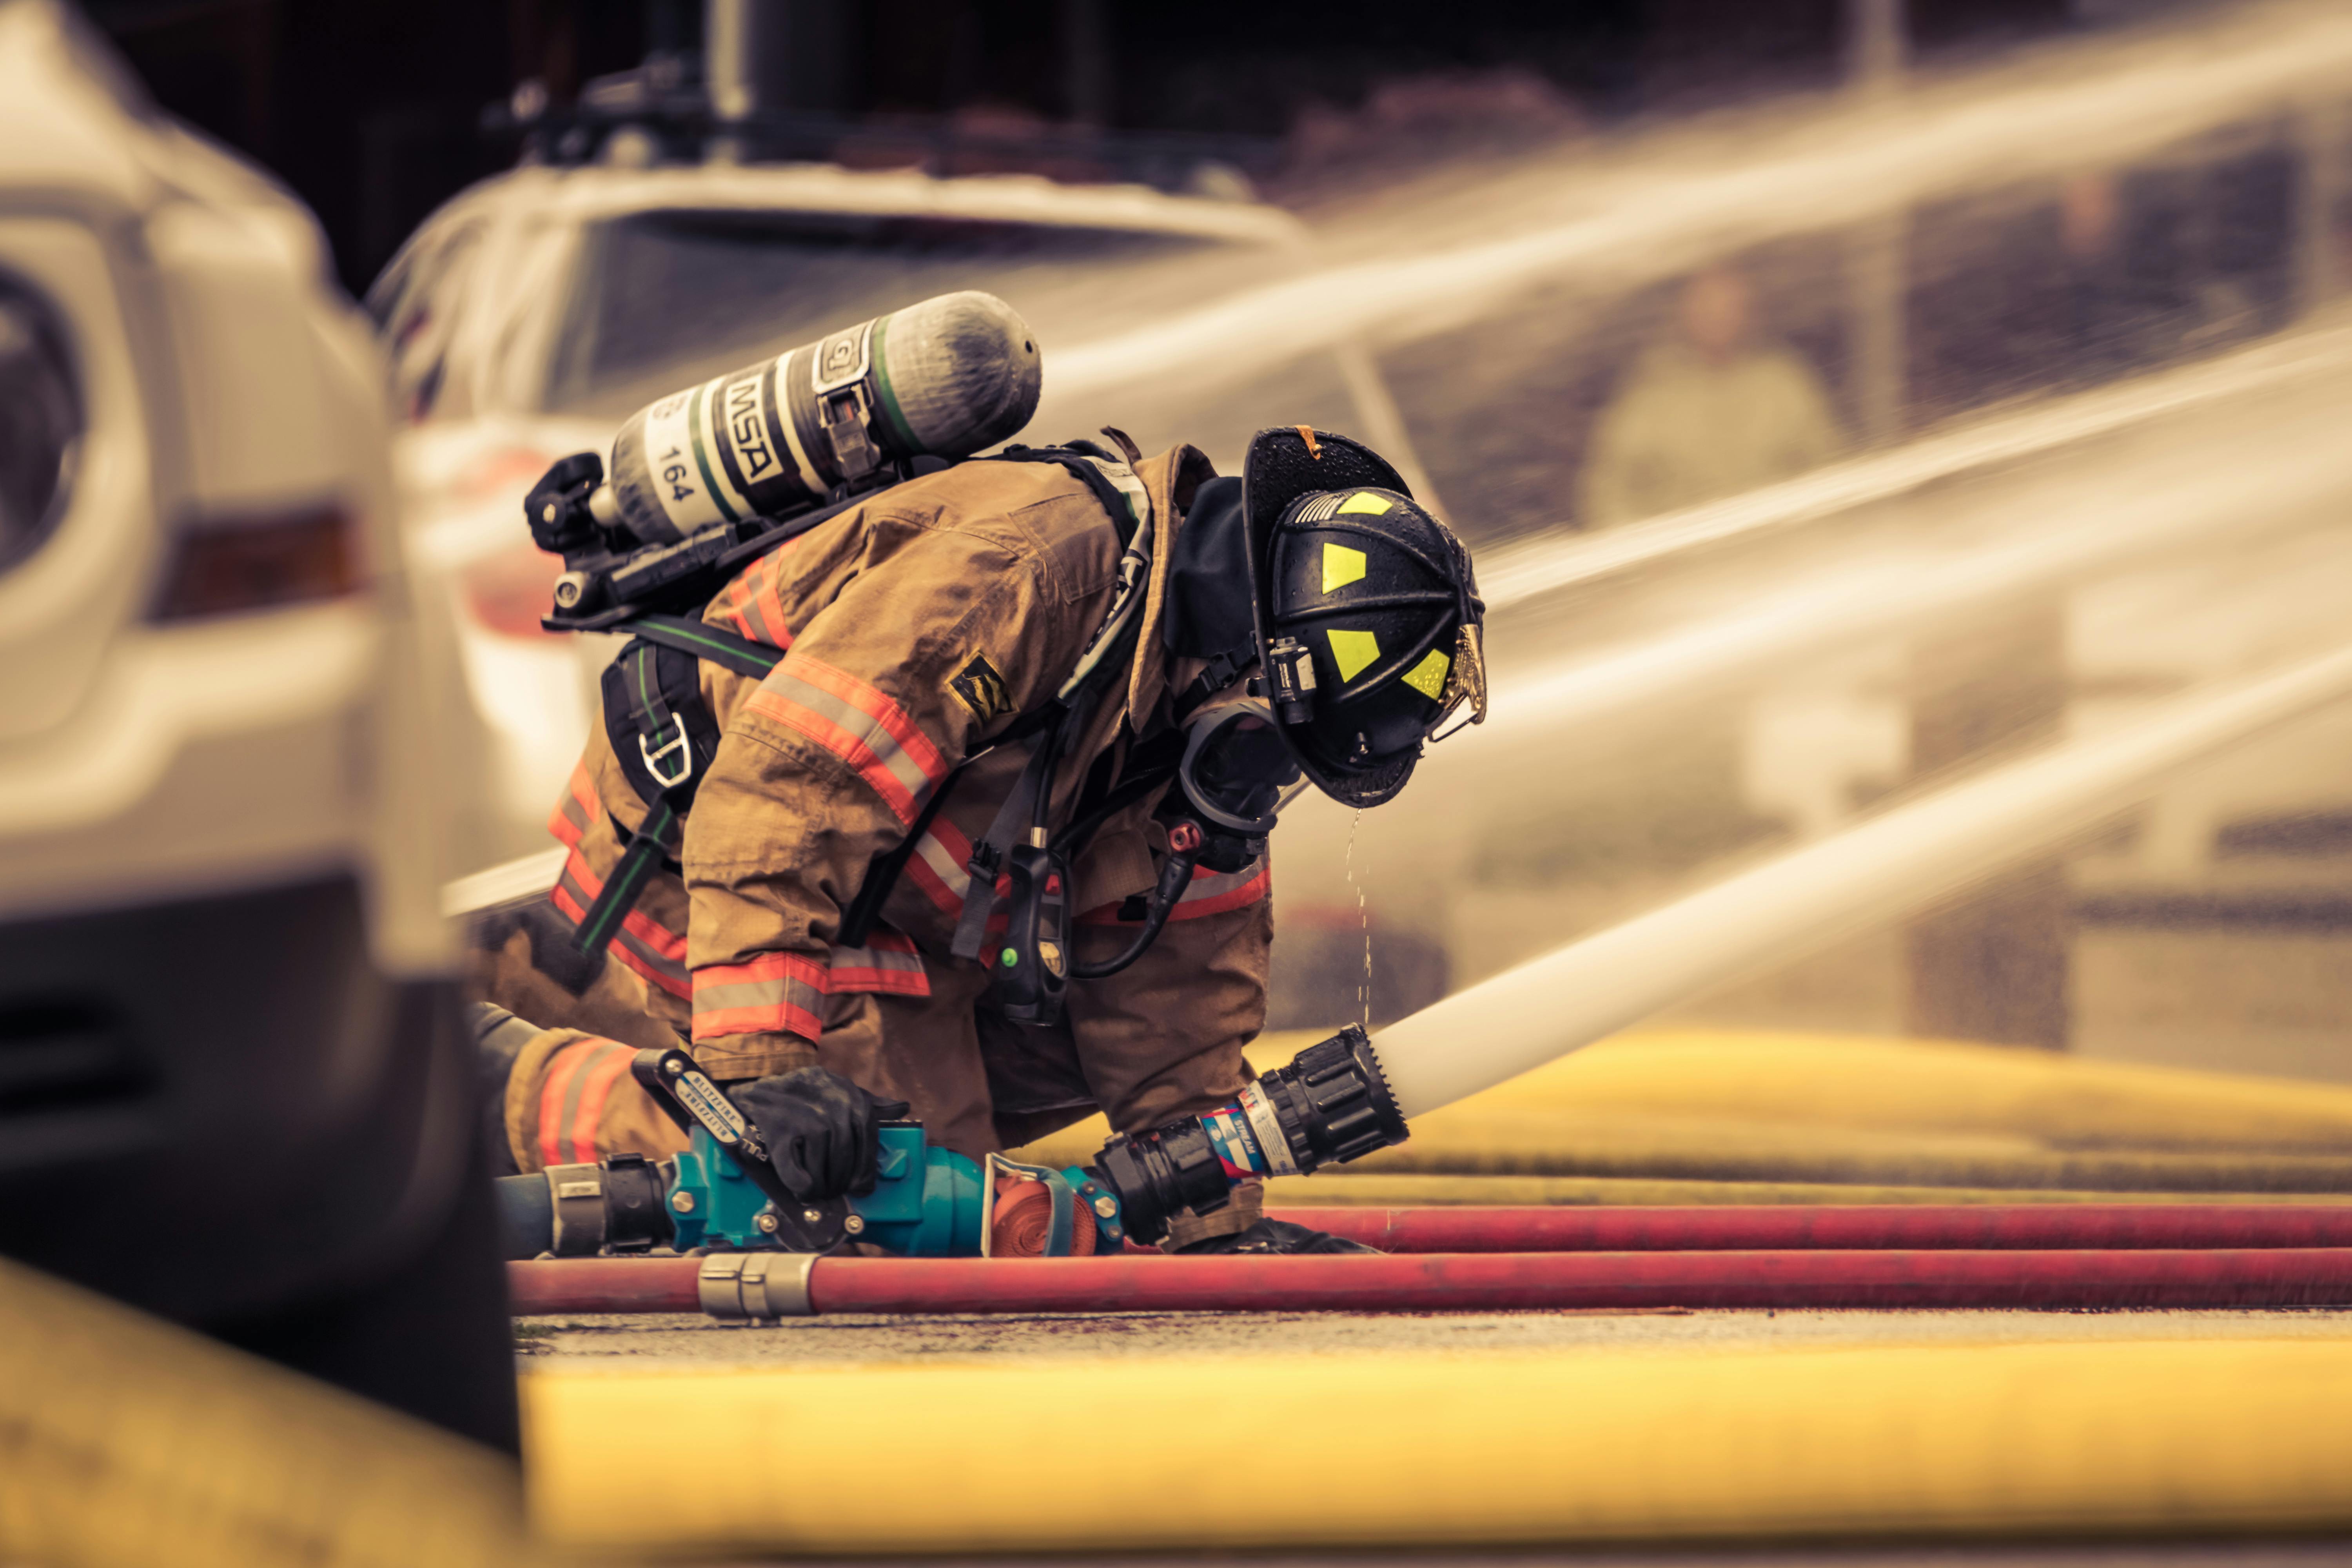 Firefighters Photos Download The BEST Free Firefighters Stock Photos  HD  Images